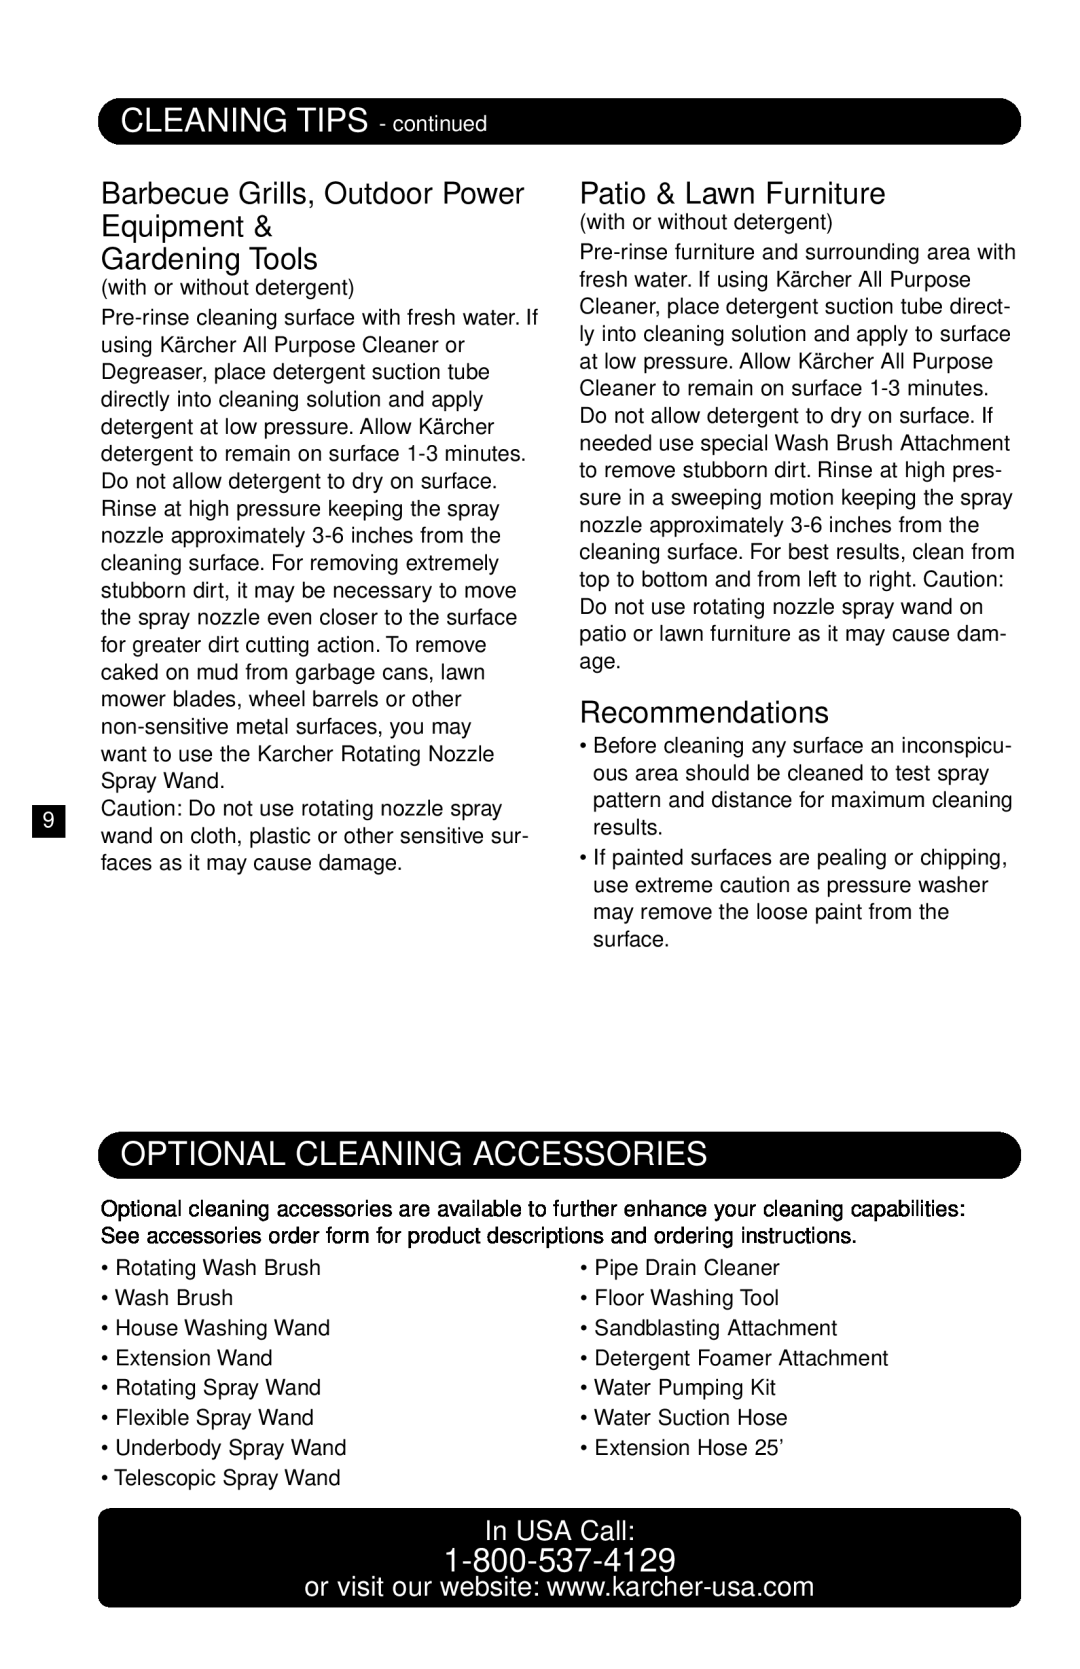 Karcher K 2300 ABI manual CLEANING TIPS - continued, Optional Cleaning Accessories, Patio & Lawn Furniture, Recommendations 